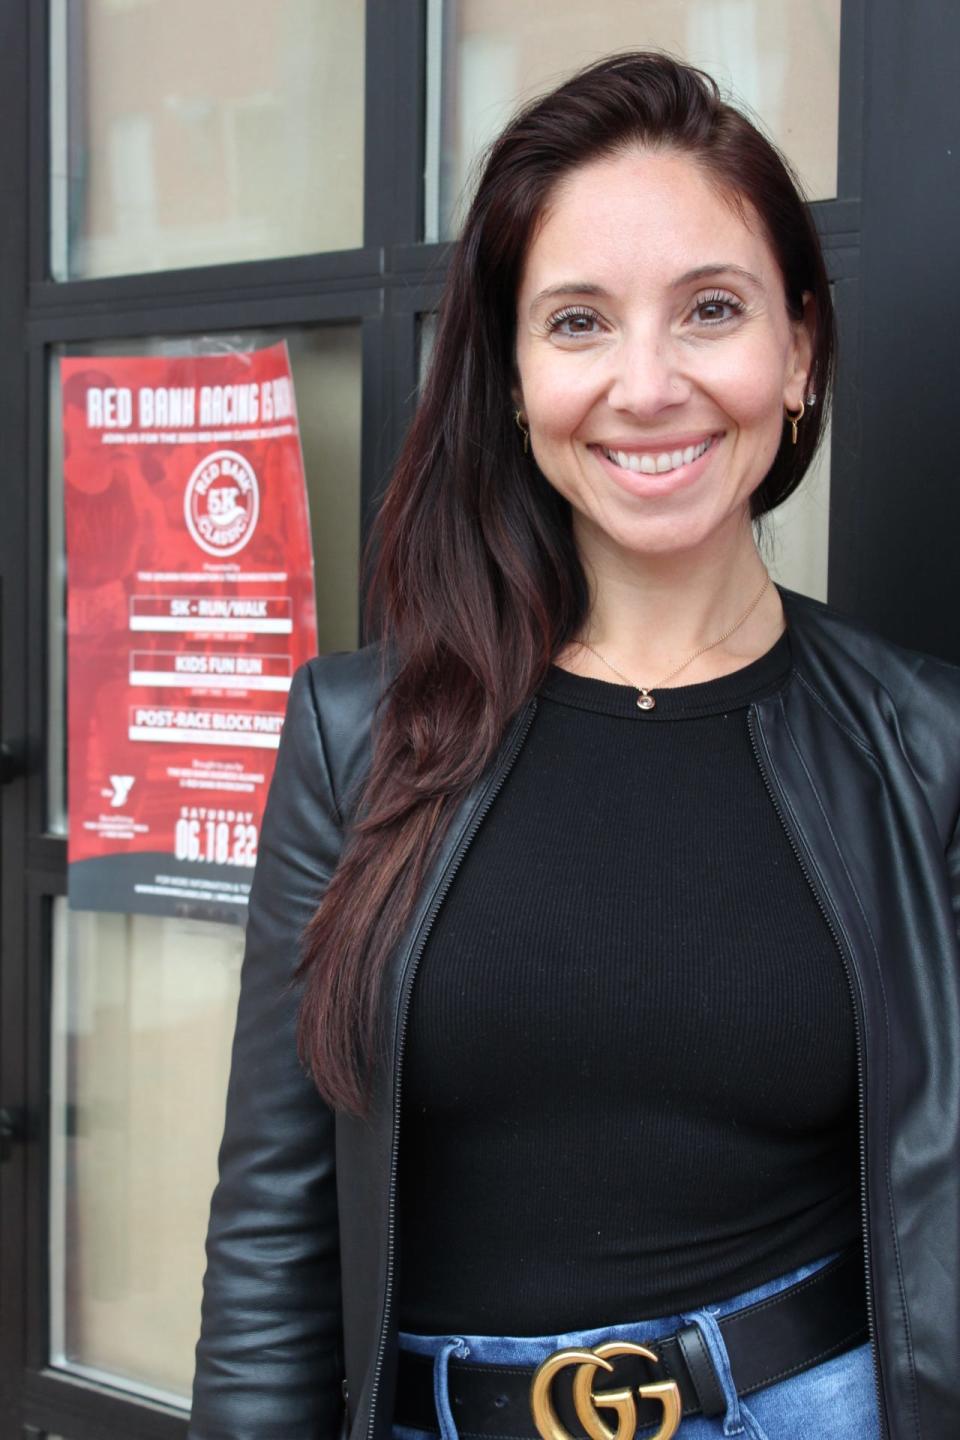 Angela Courtney, owner of the Sweetest Sin Boutique, was one of the organizers that lead the effort to bring back a charity run to Red Bank in 2018.